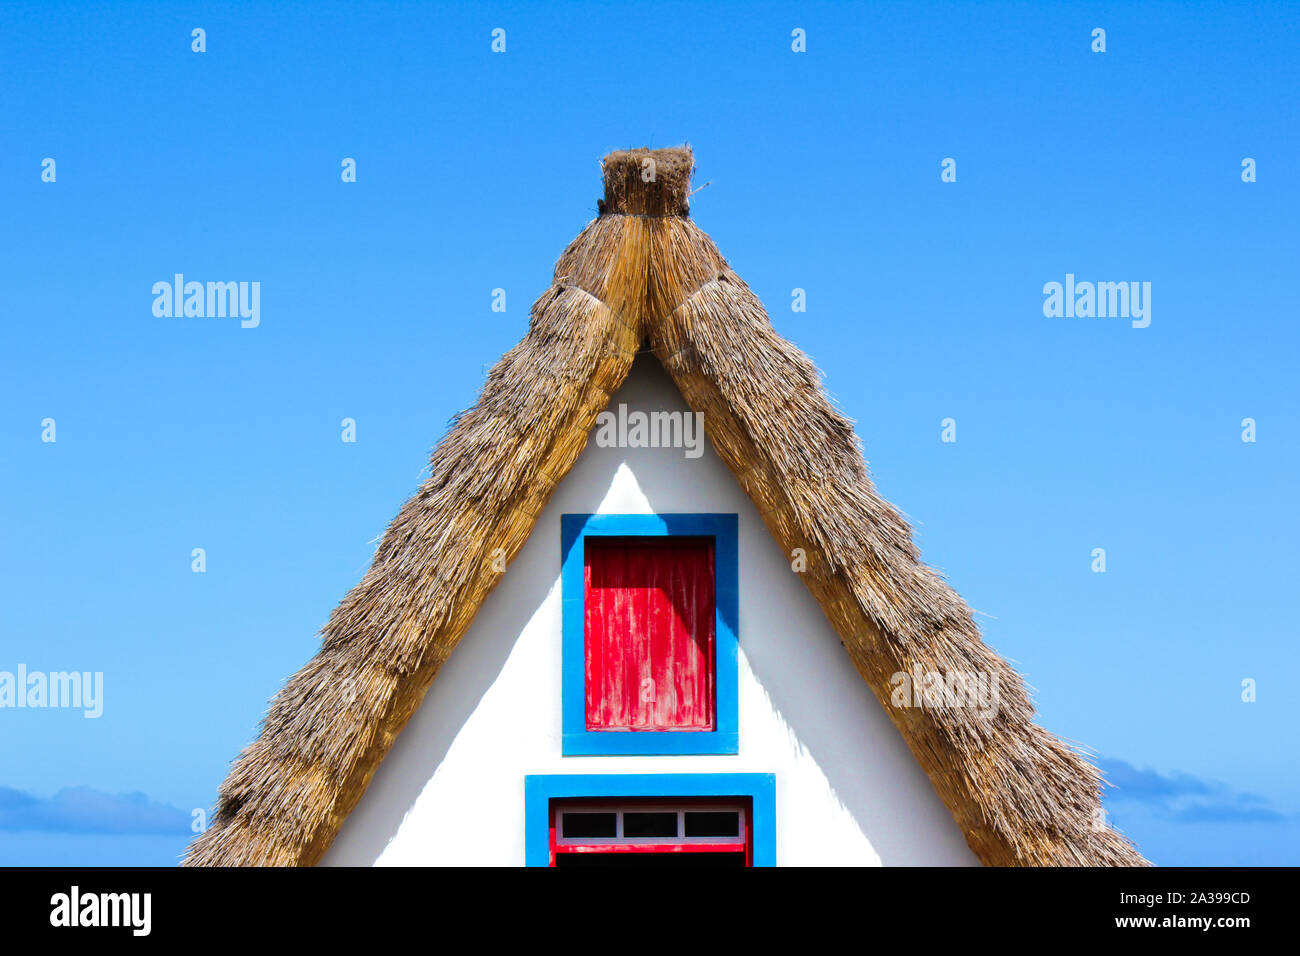 Detail of the front side facade of the traditional house in Santana, Madeira Island, Portugal. Typical thatched roof, colorful facade in white, red and blue colors. Portuguese architecture. Stock Photo